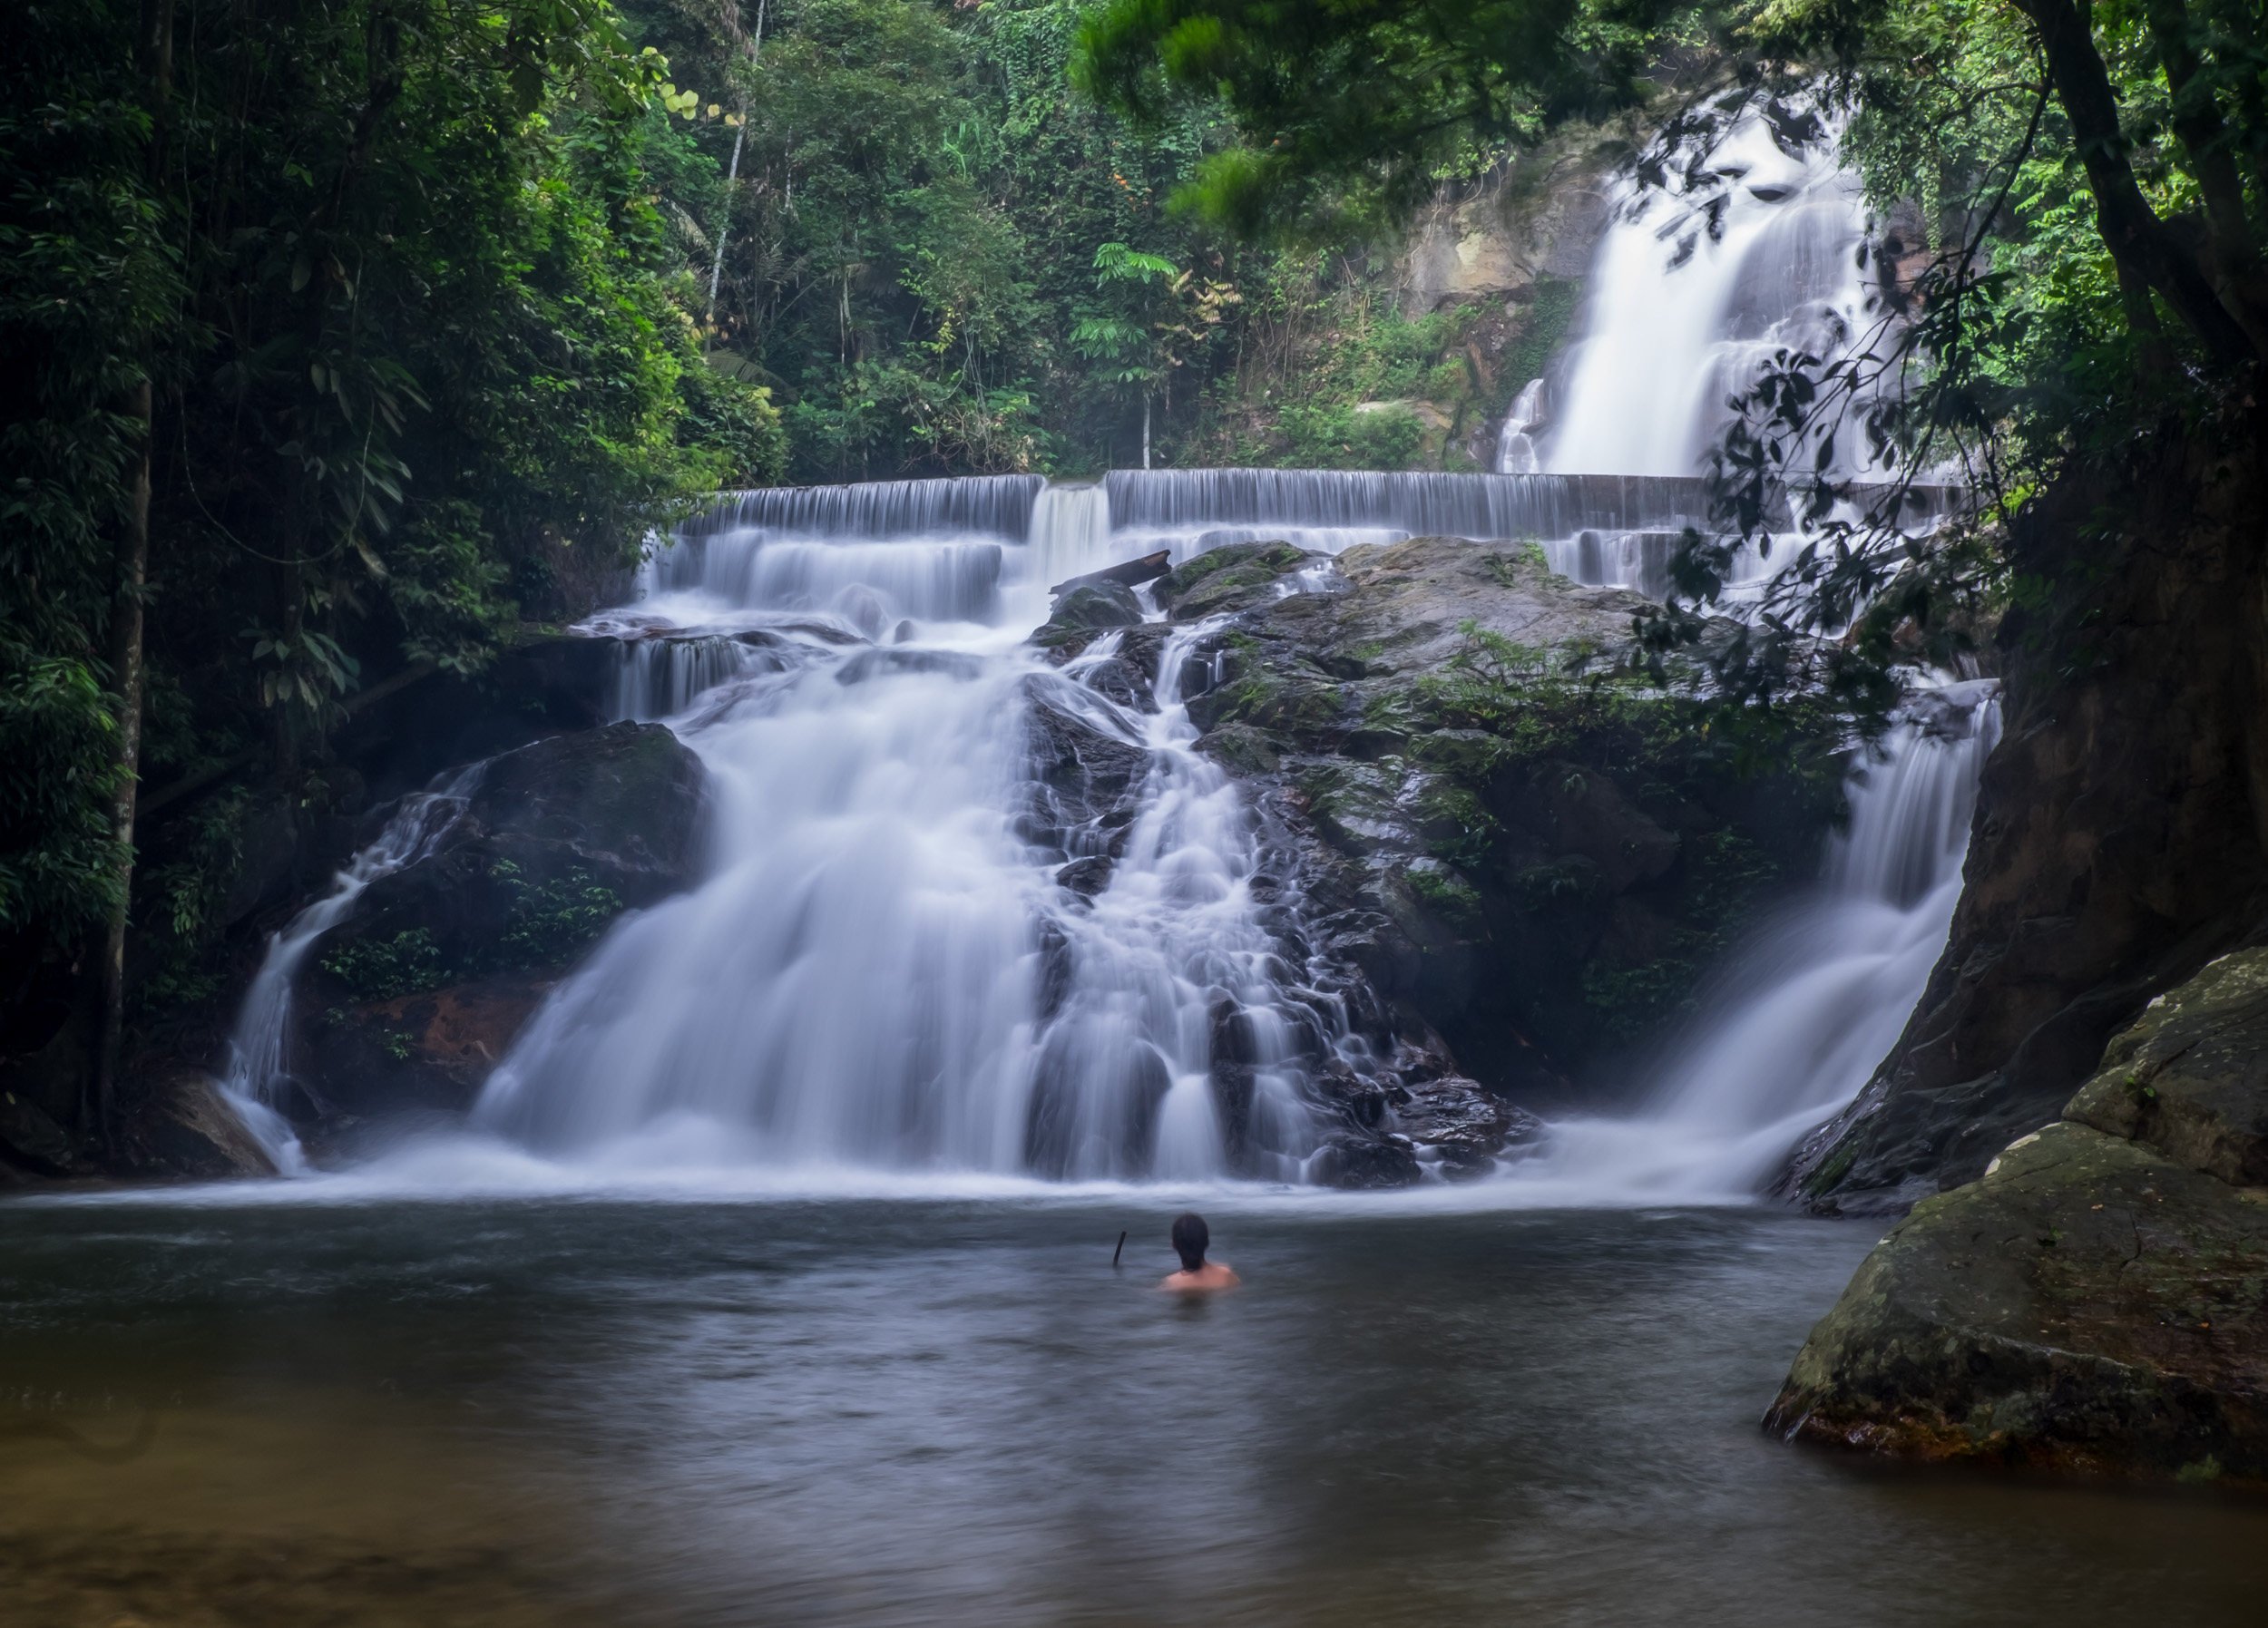 The falls at Lata Kekabu, one of the Lenggong Valley’s many natural attractions. With the area’s world heritage status at risk, a few locals are fighting to promote the valley to tourists. Photo: Chan Kit Yeng